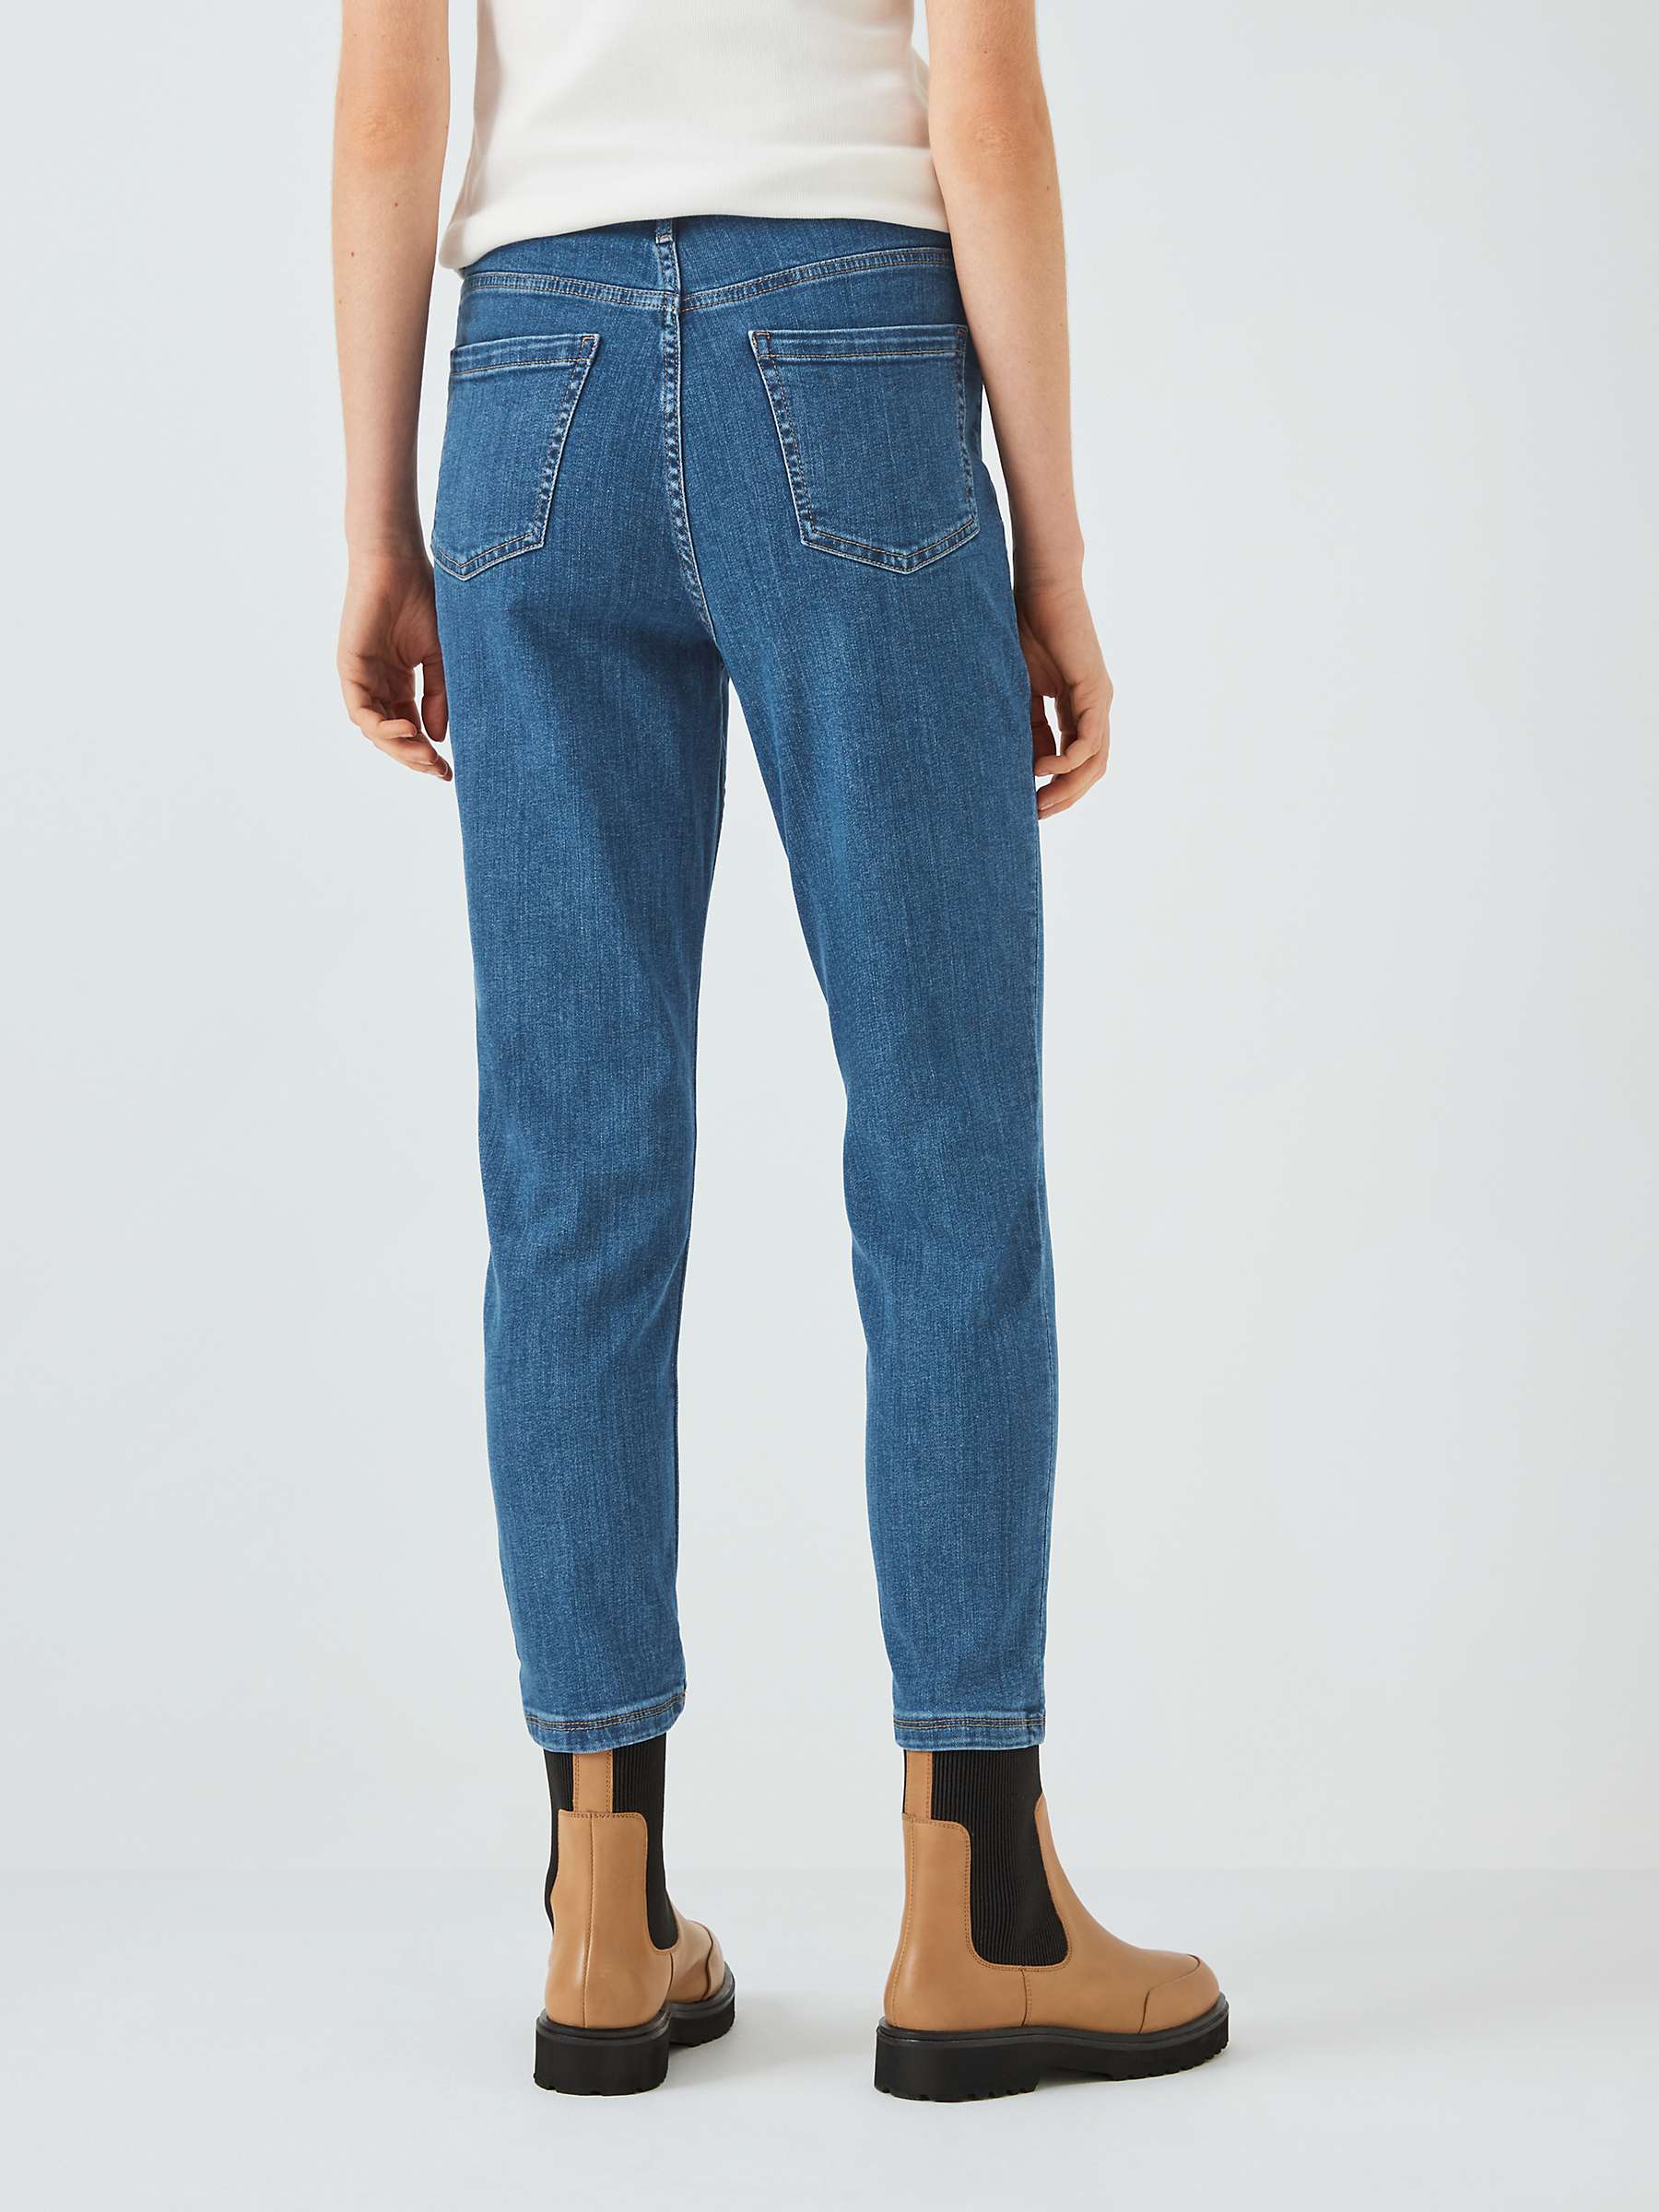 Buy John Lewis ANYDAY Hoxton Mom Jeans Online at johnlewis.com